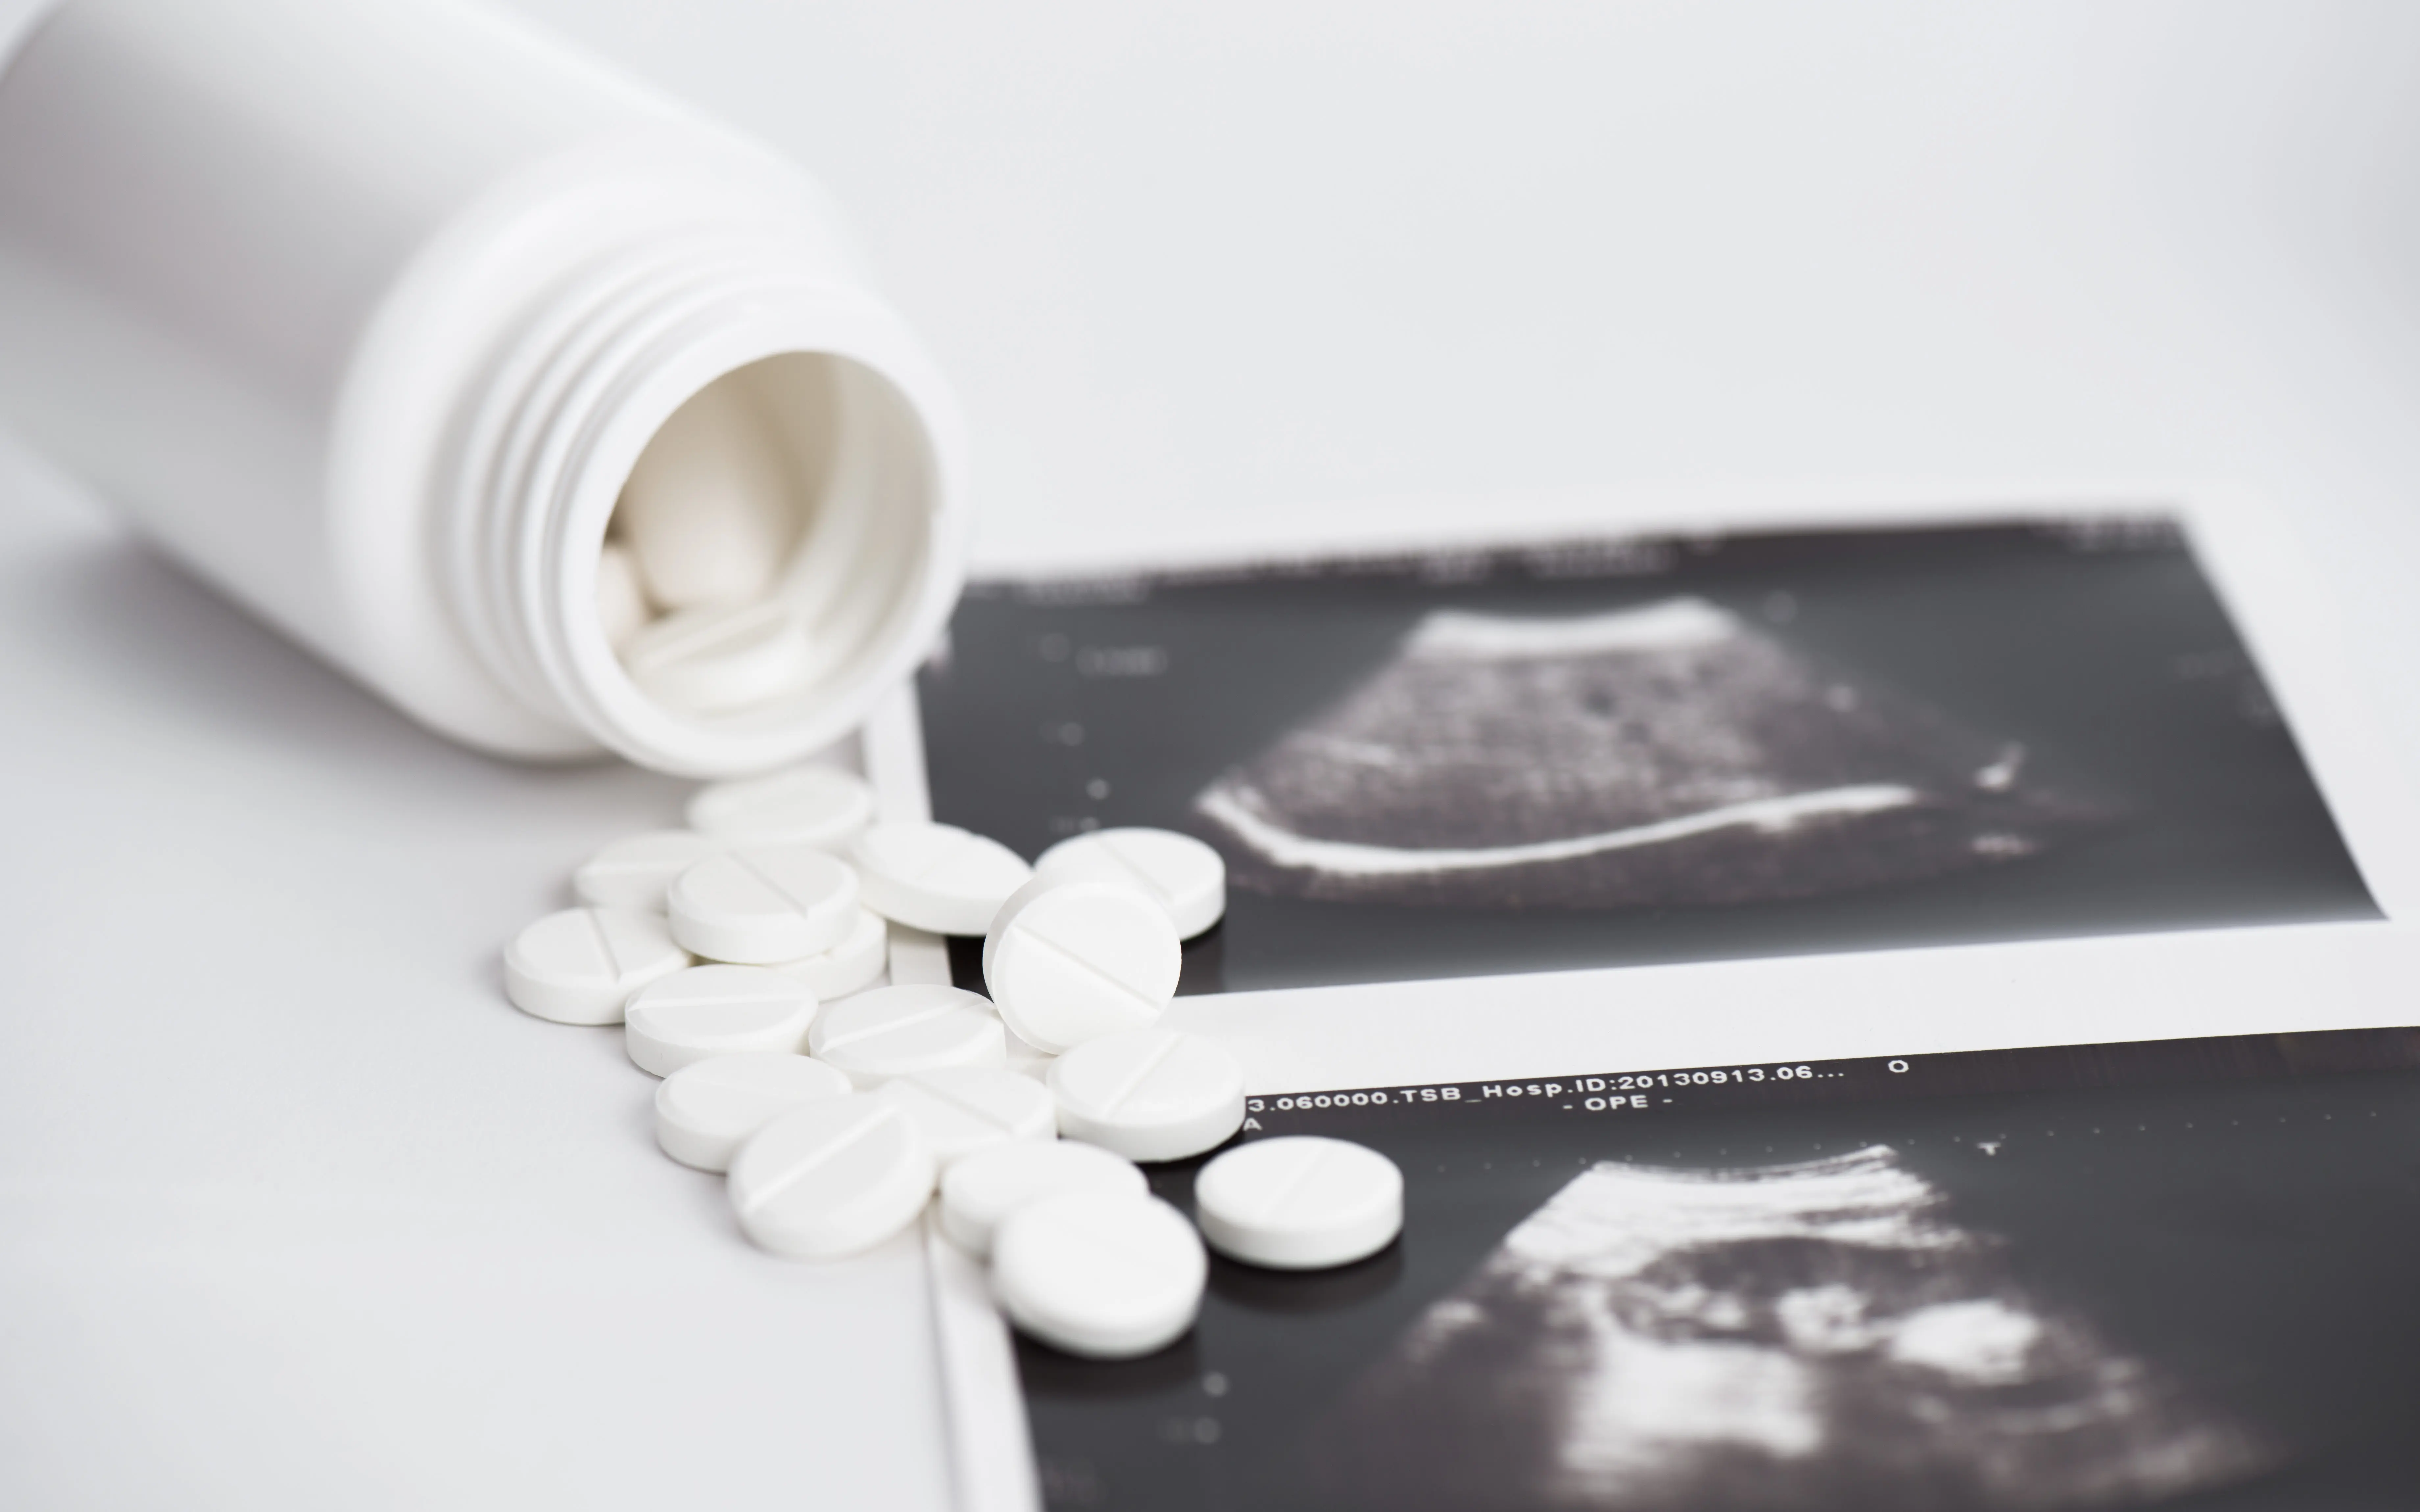 ru-486 abortion pill with ultrasound